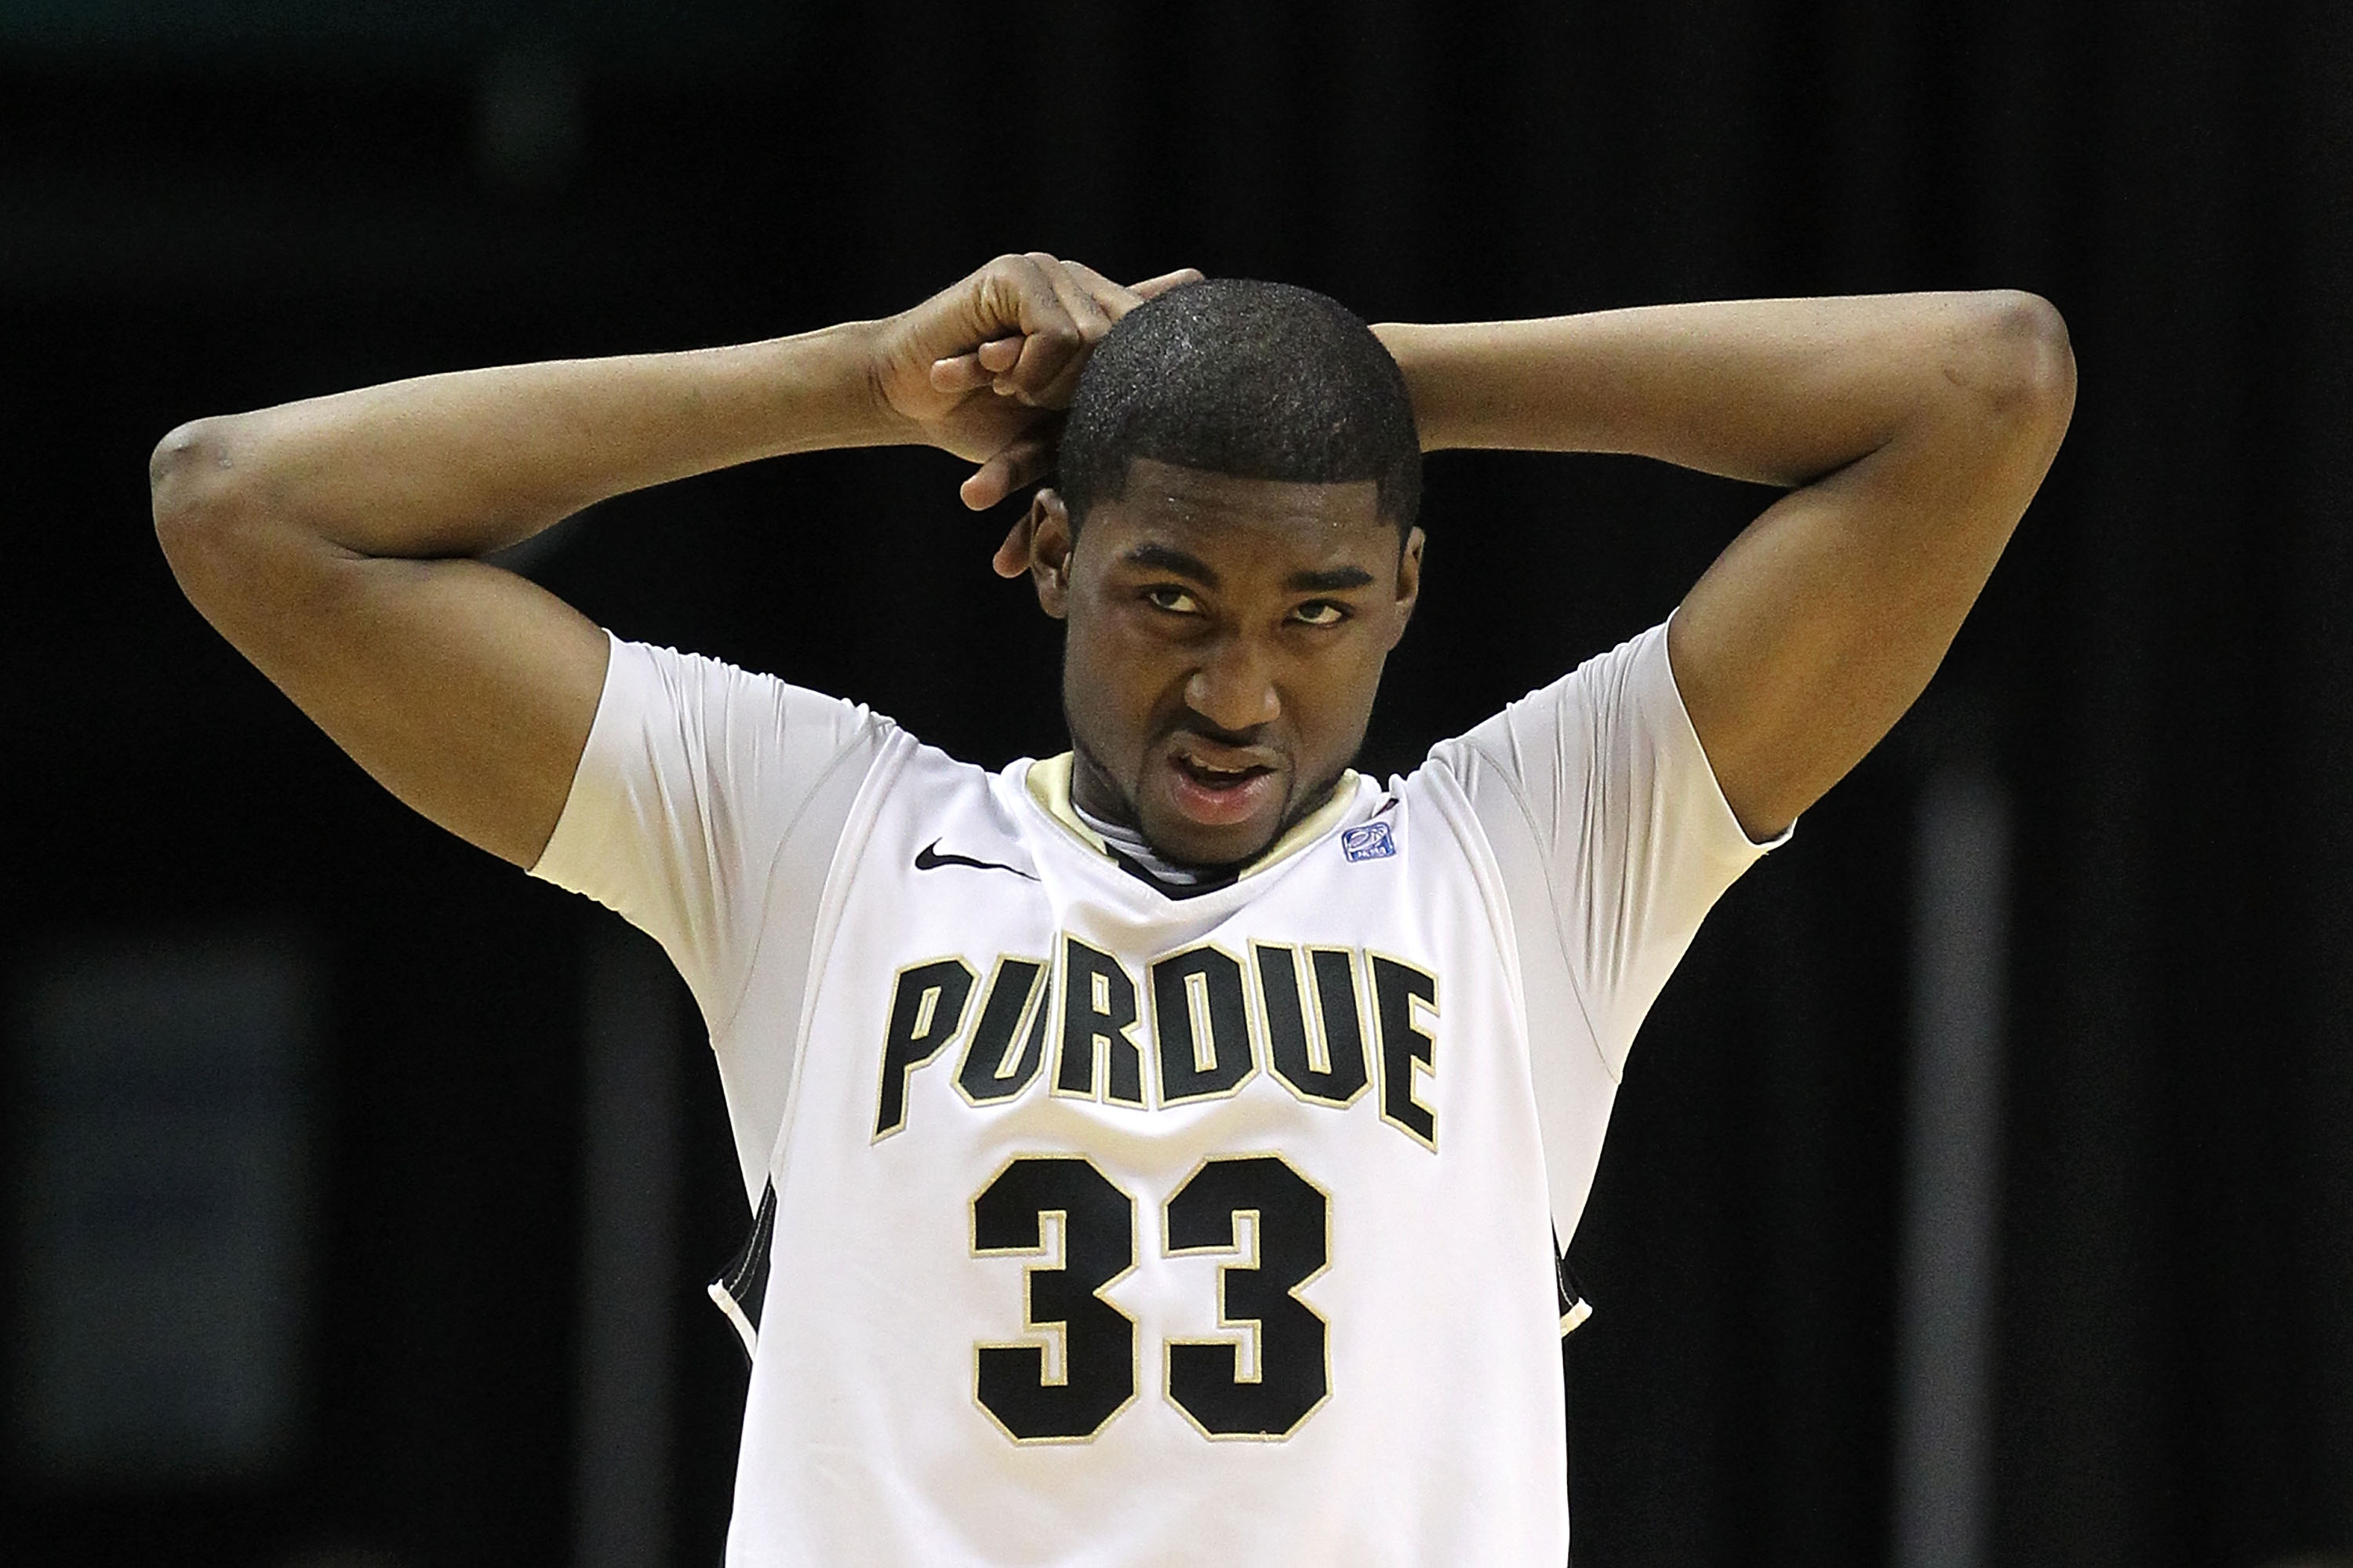 INDIANAPOLIS, IN - MARCH 11:  E'Twaun Moore #33 of the Purdue Boilermakers looks on dejected against the Michigan State Spartans during the quarterfinals of the 2011 Big Ten Men's Basketball Tournament at Conseco Fieldhouse on March 11, 2011 in Indianapol